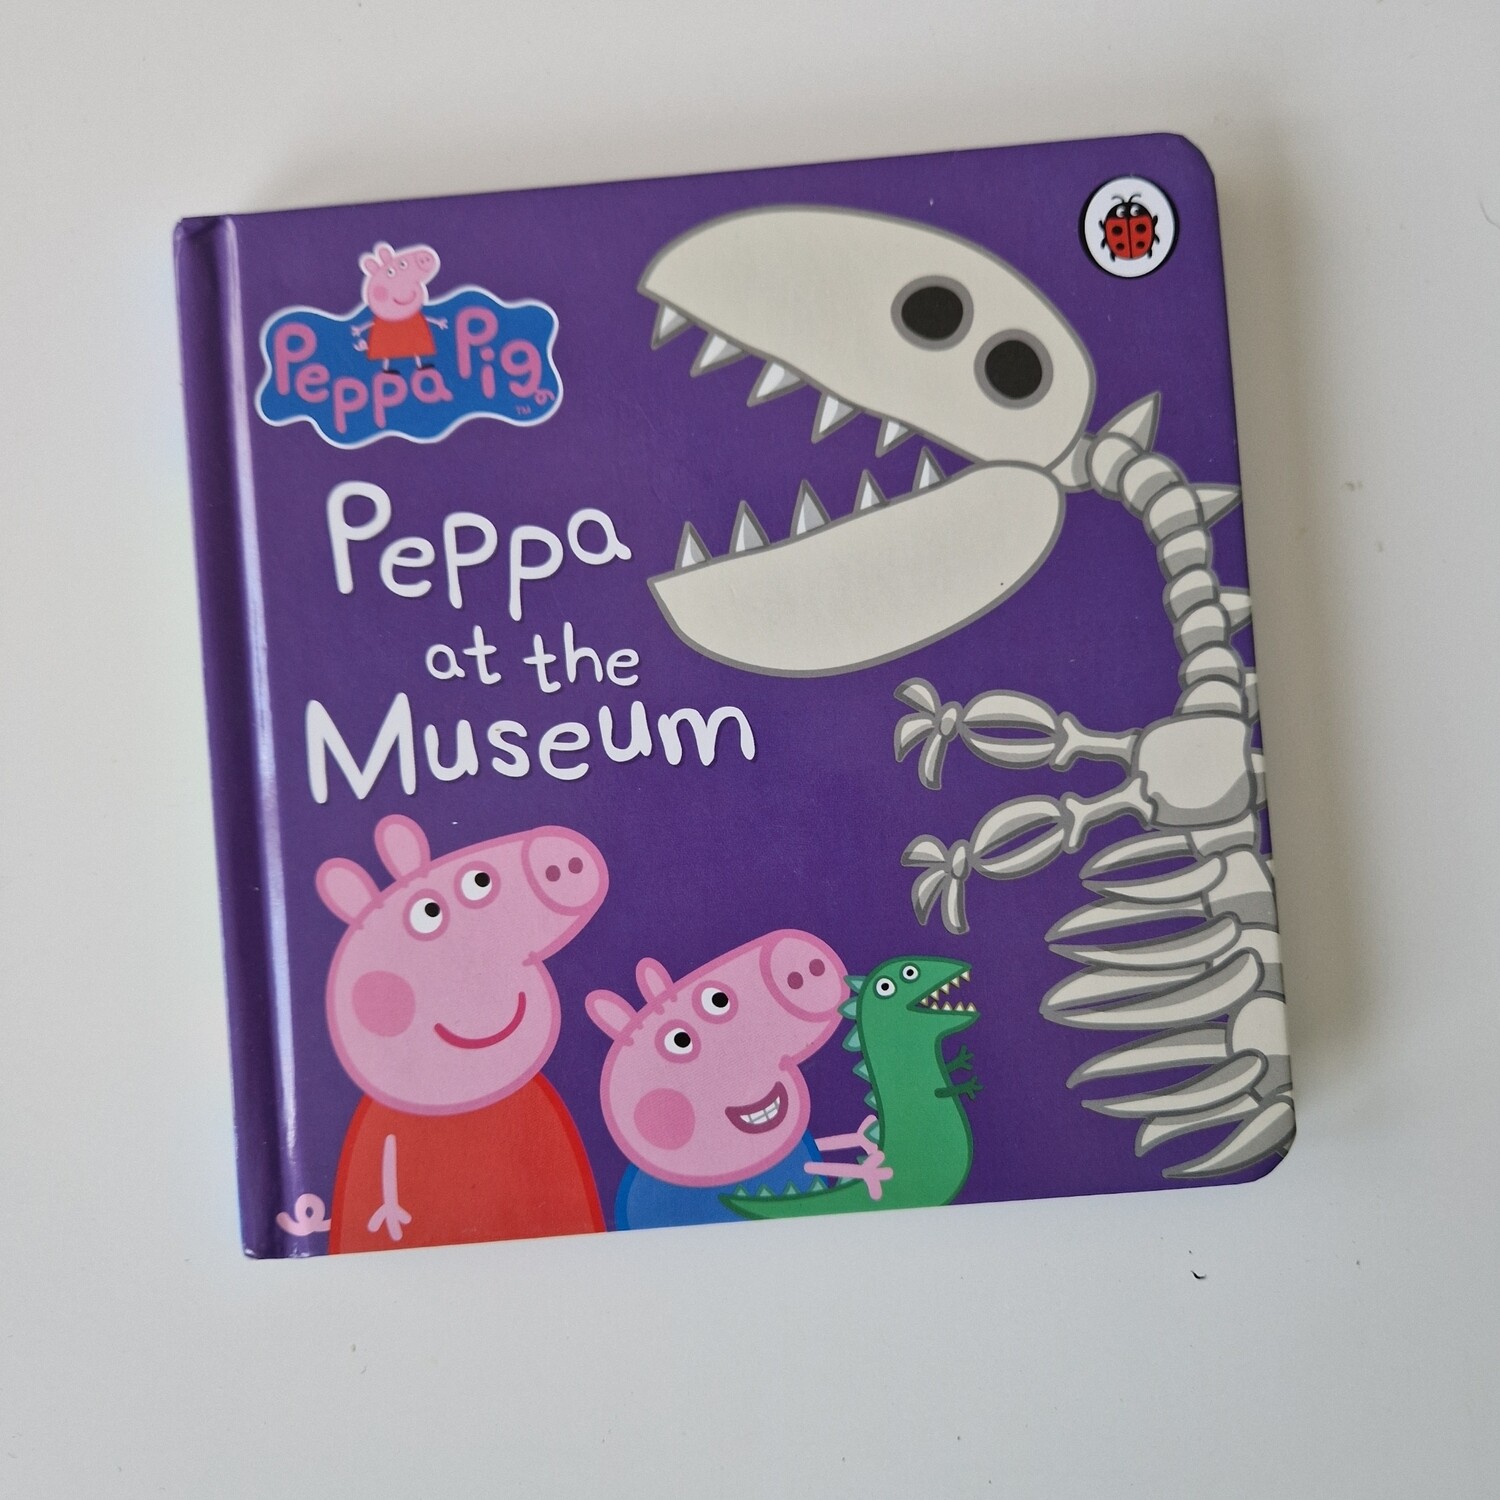 Peppa Pig at the Museum